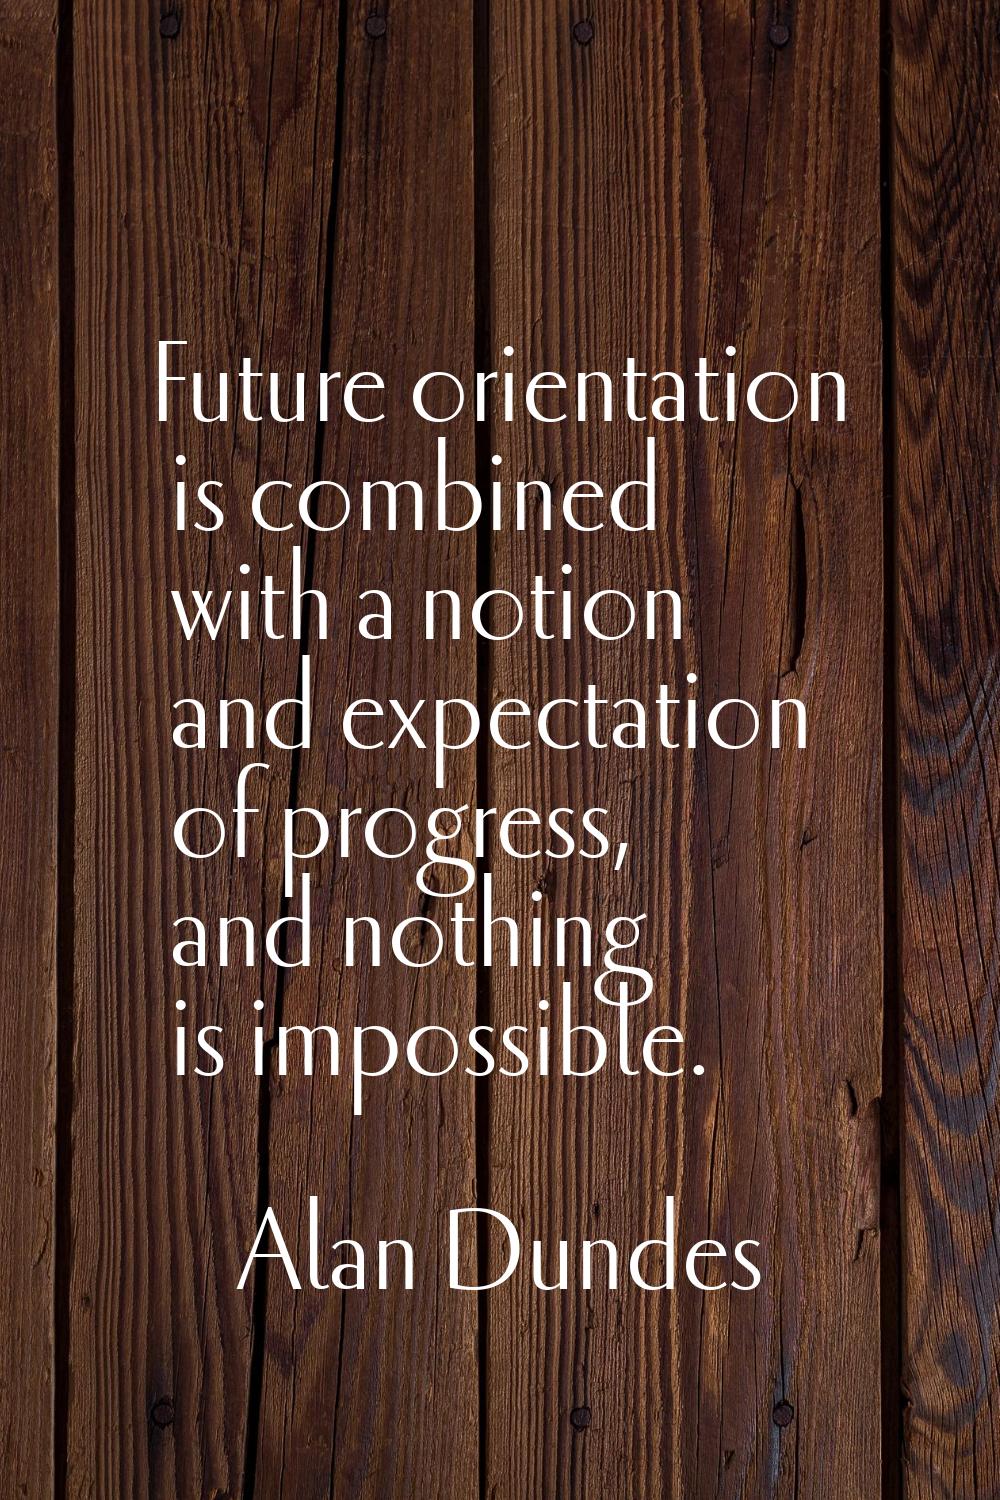 Future orientation is combined with a notion and expectation of progress, and nothing is impossible